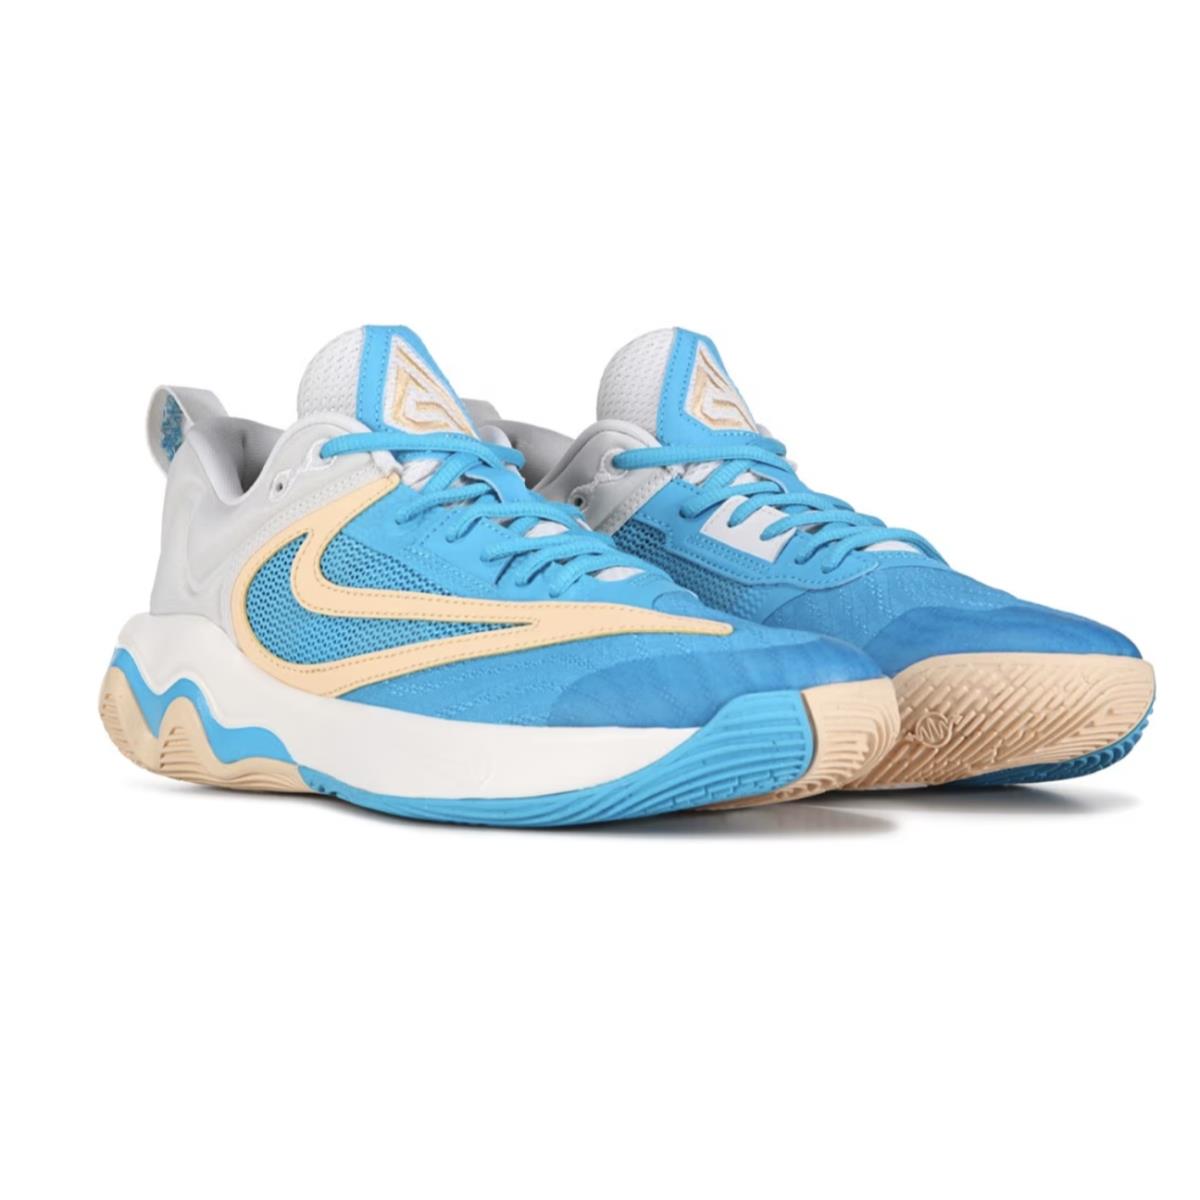 Nike Giannis Immortality 3 Blue Peach White All Sizes Basketball Shoes Men`s - Blue